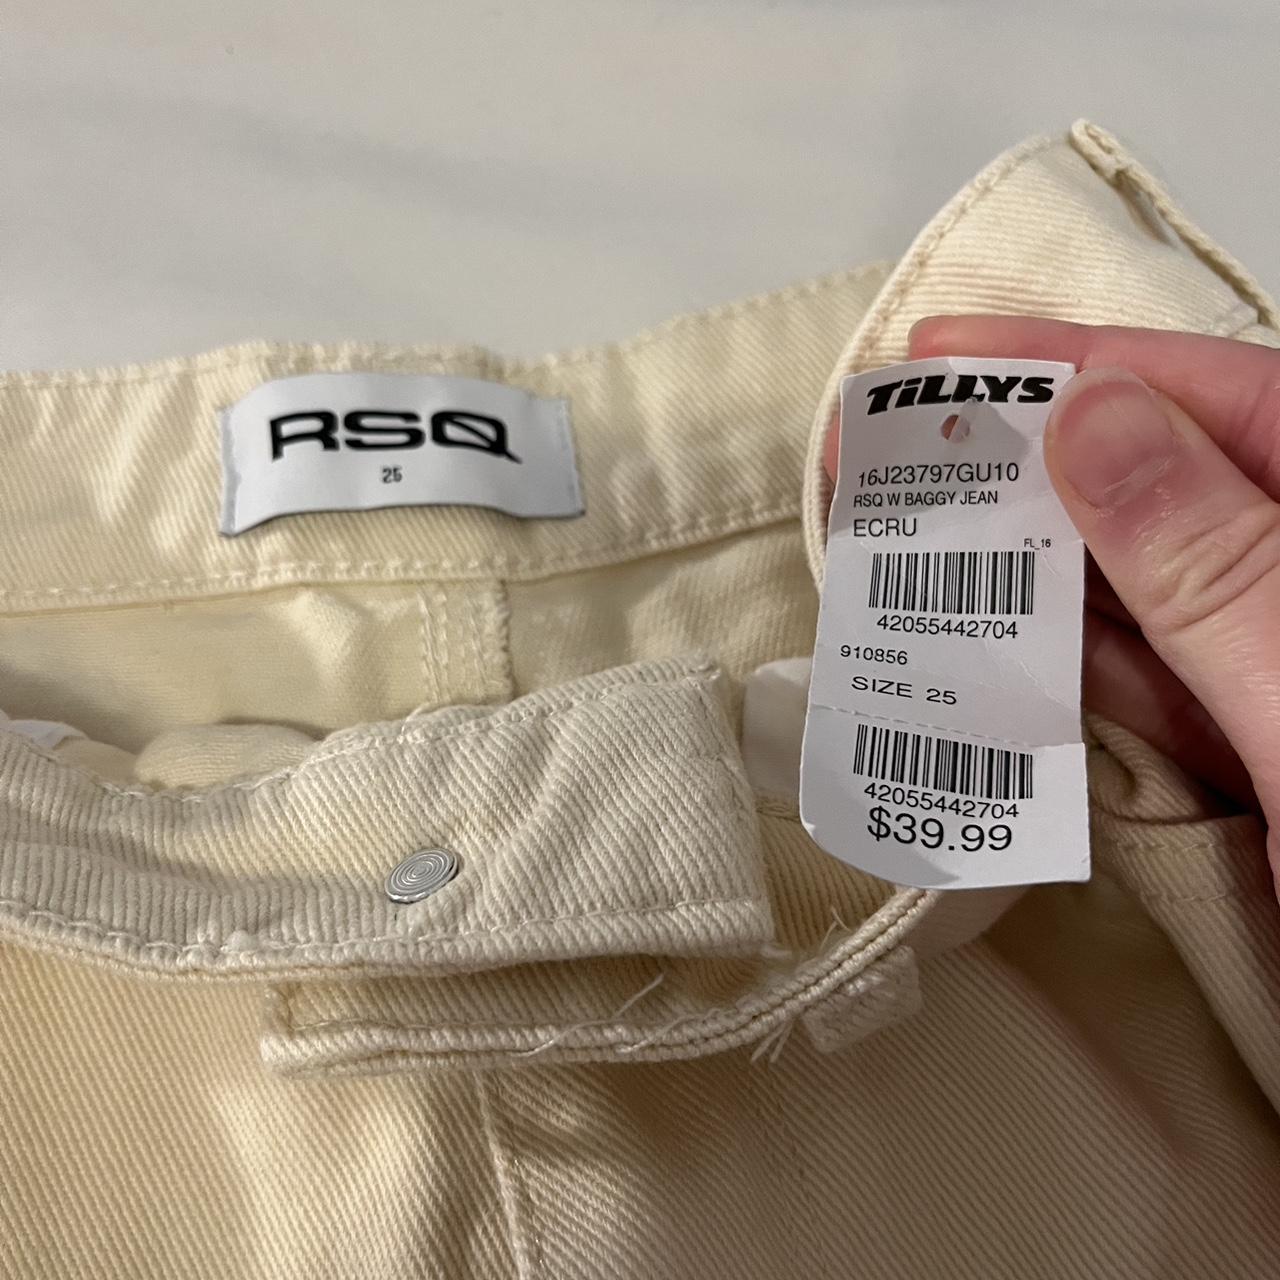 Tillys Women's Cream and Tan Jeans (2)